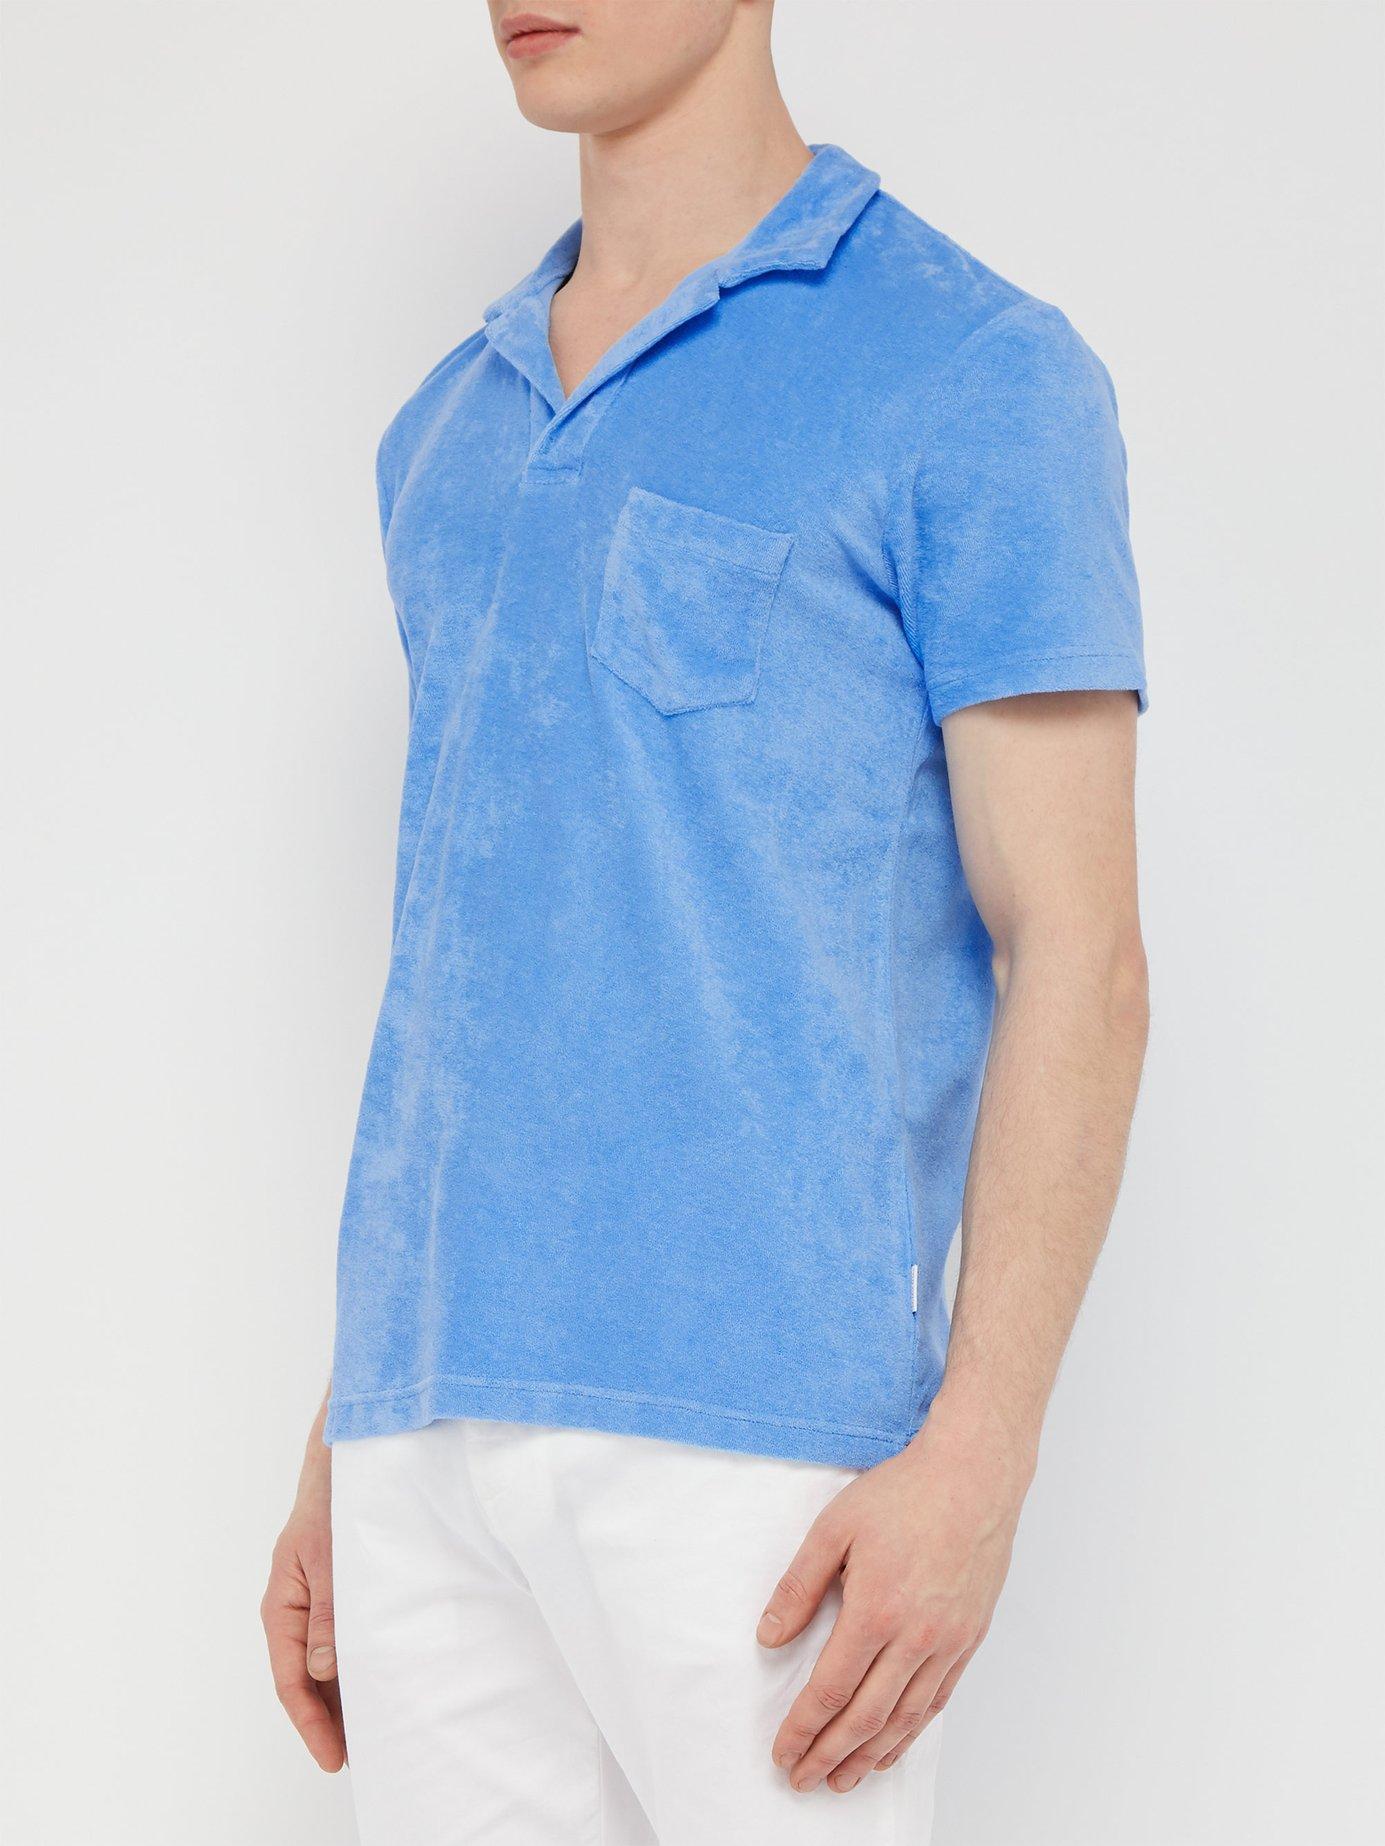 Orlebar Brown Cotton Terry Polo Shirt in Blue for Men - Lyst